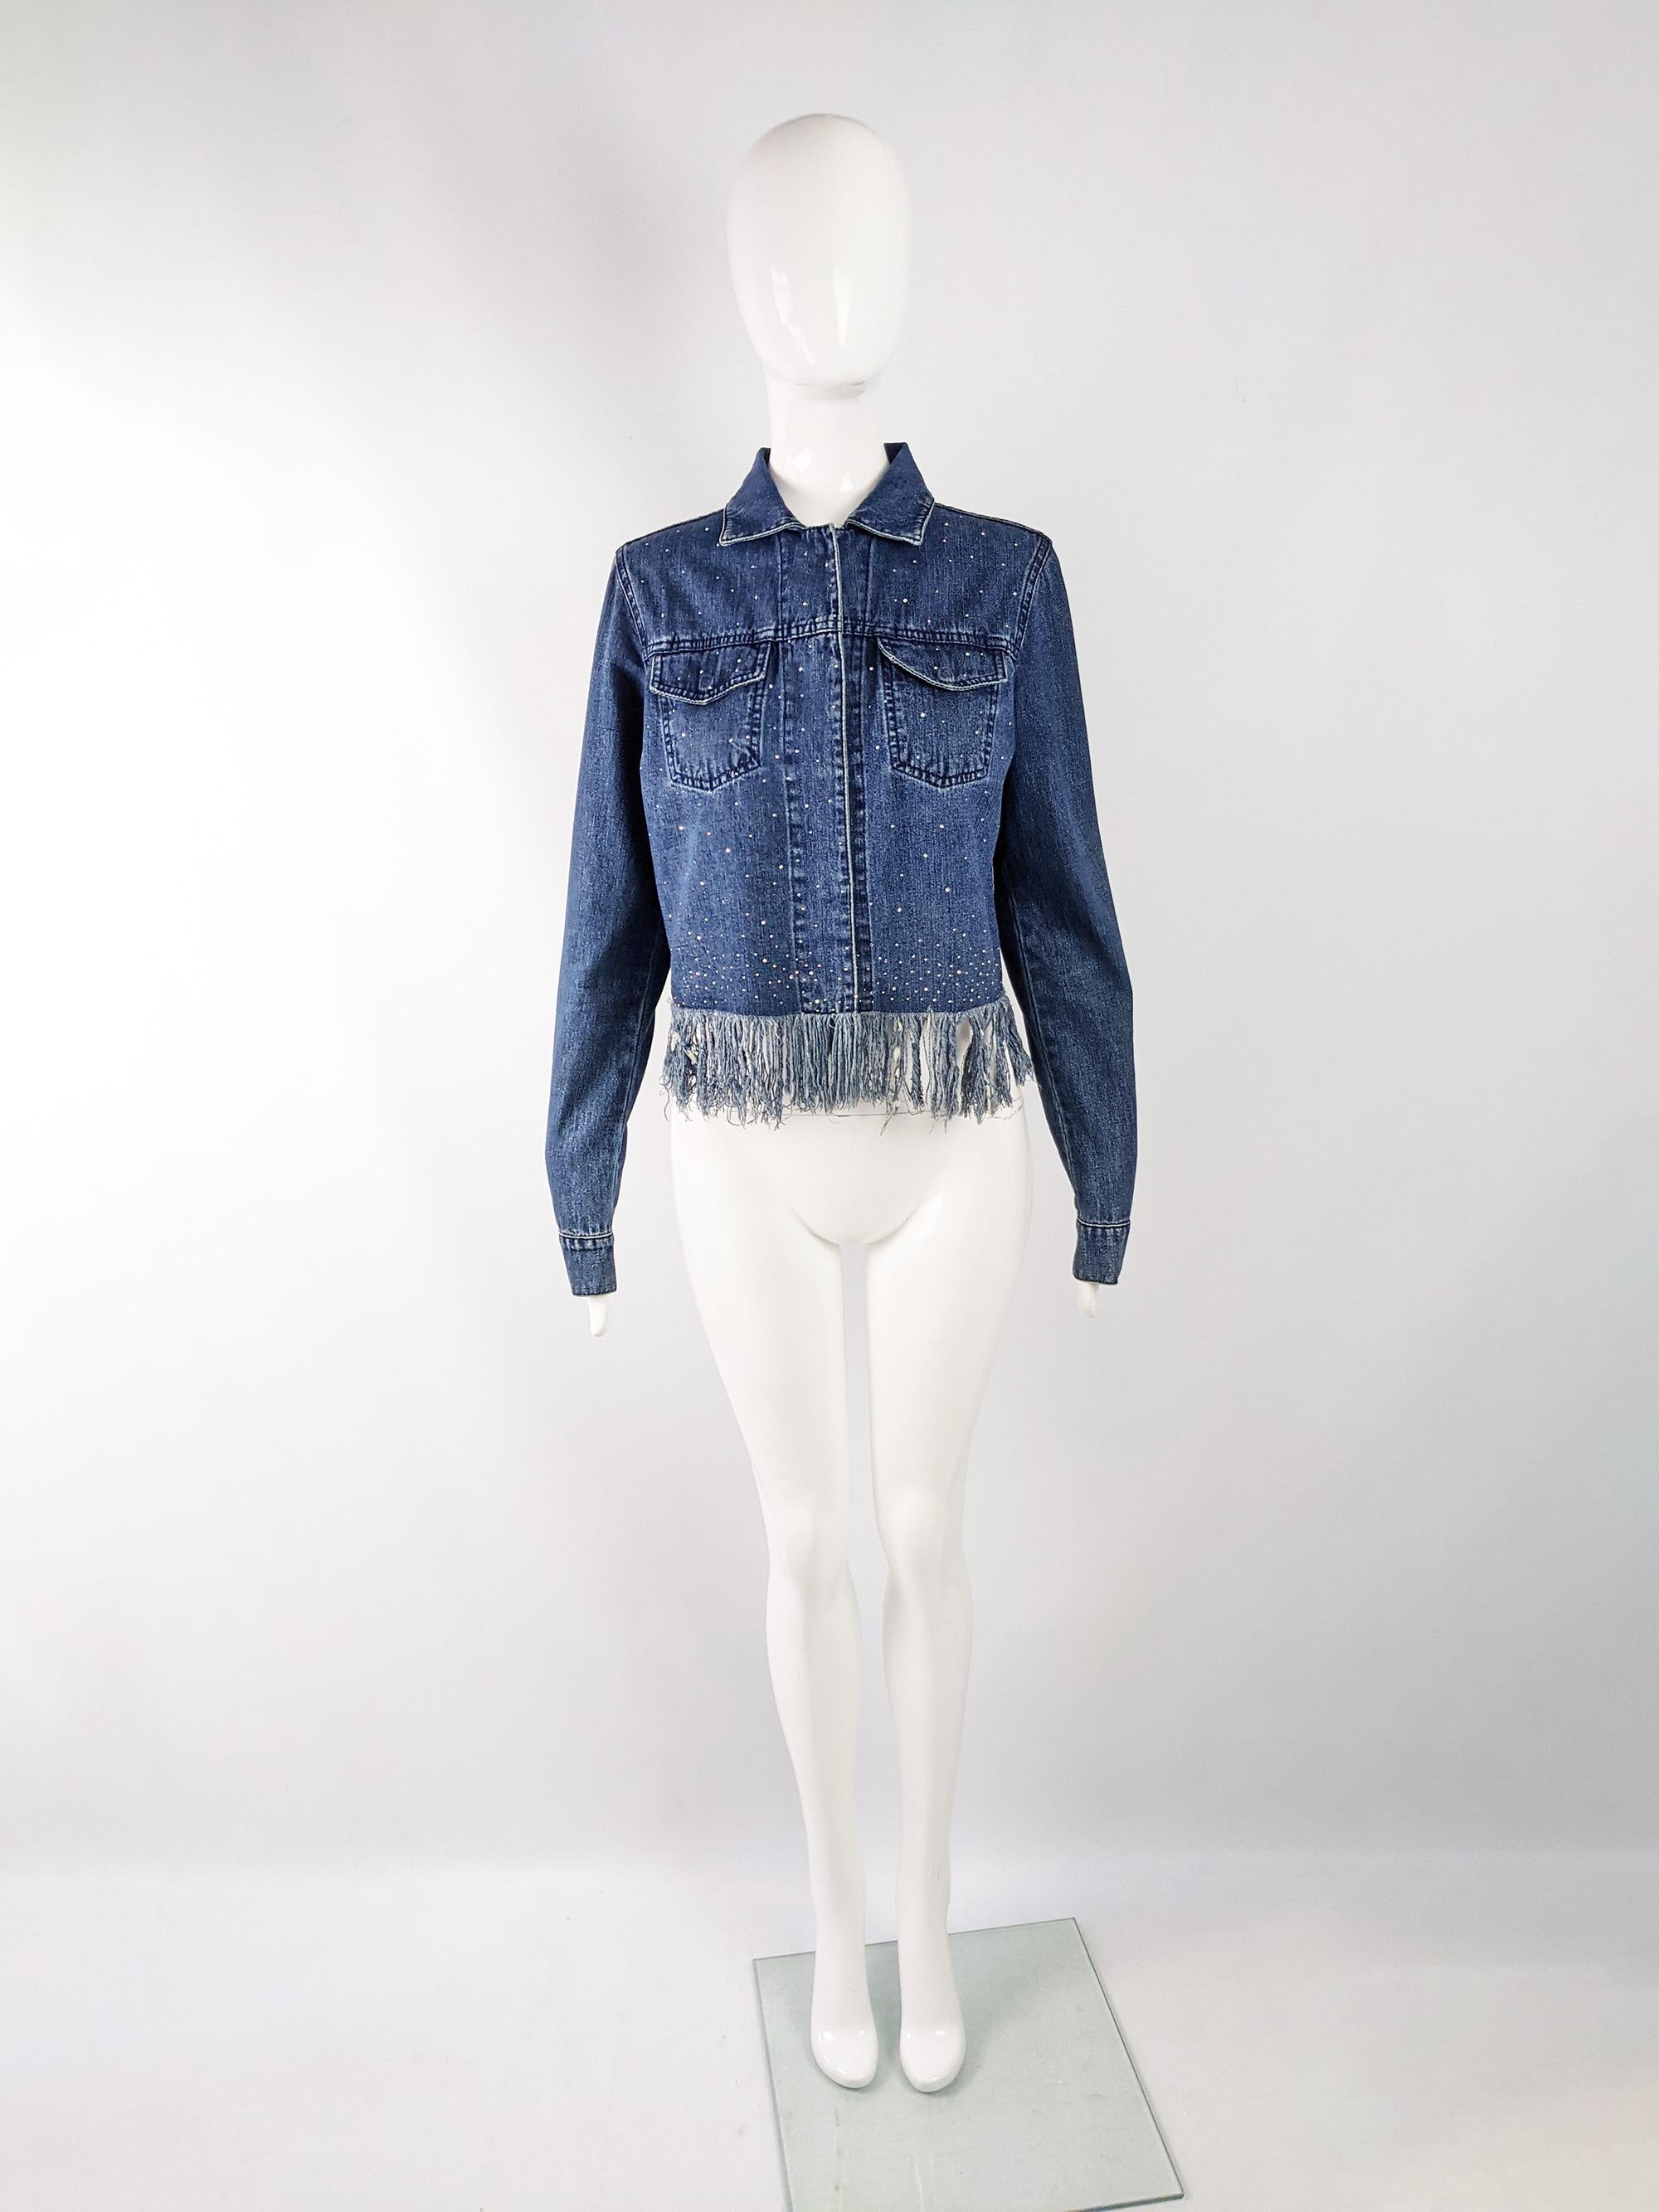 A fabulous and rare vintage Fendi womens denim jacket from the late 90s / early 2000s. Made in Italy from an indigo denim with fabulous crystals/ rhinestones beaded throughout and distressed fringing along the bottom for a glamorous y2k look.